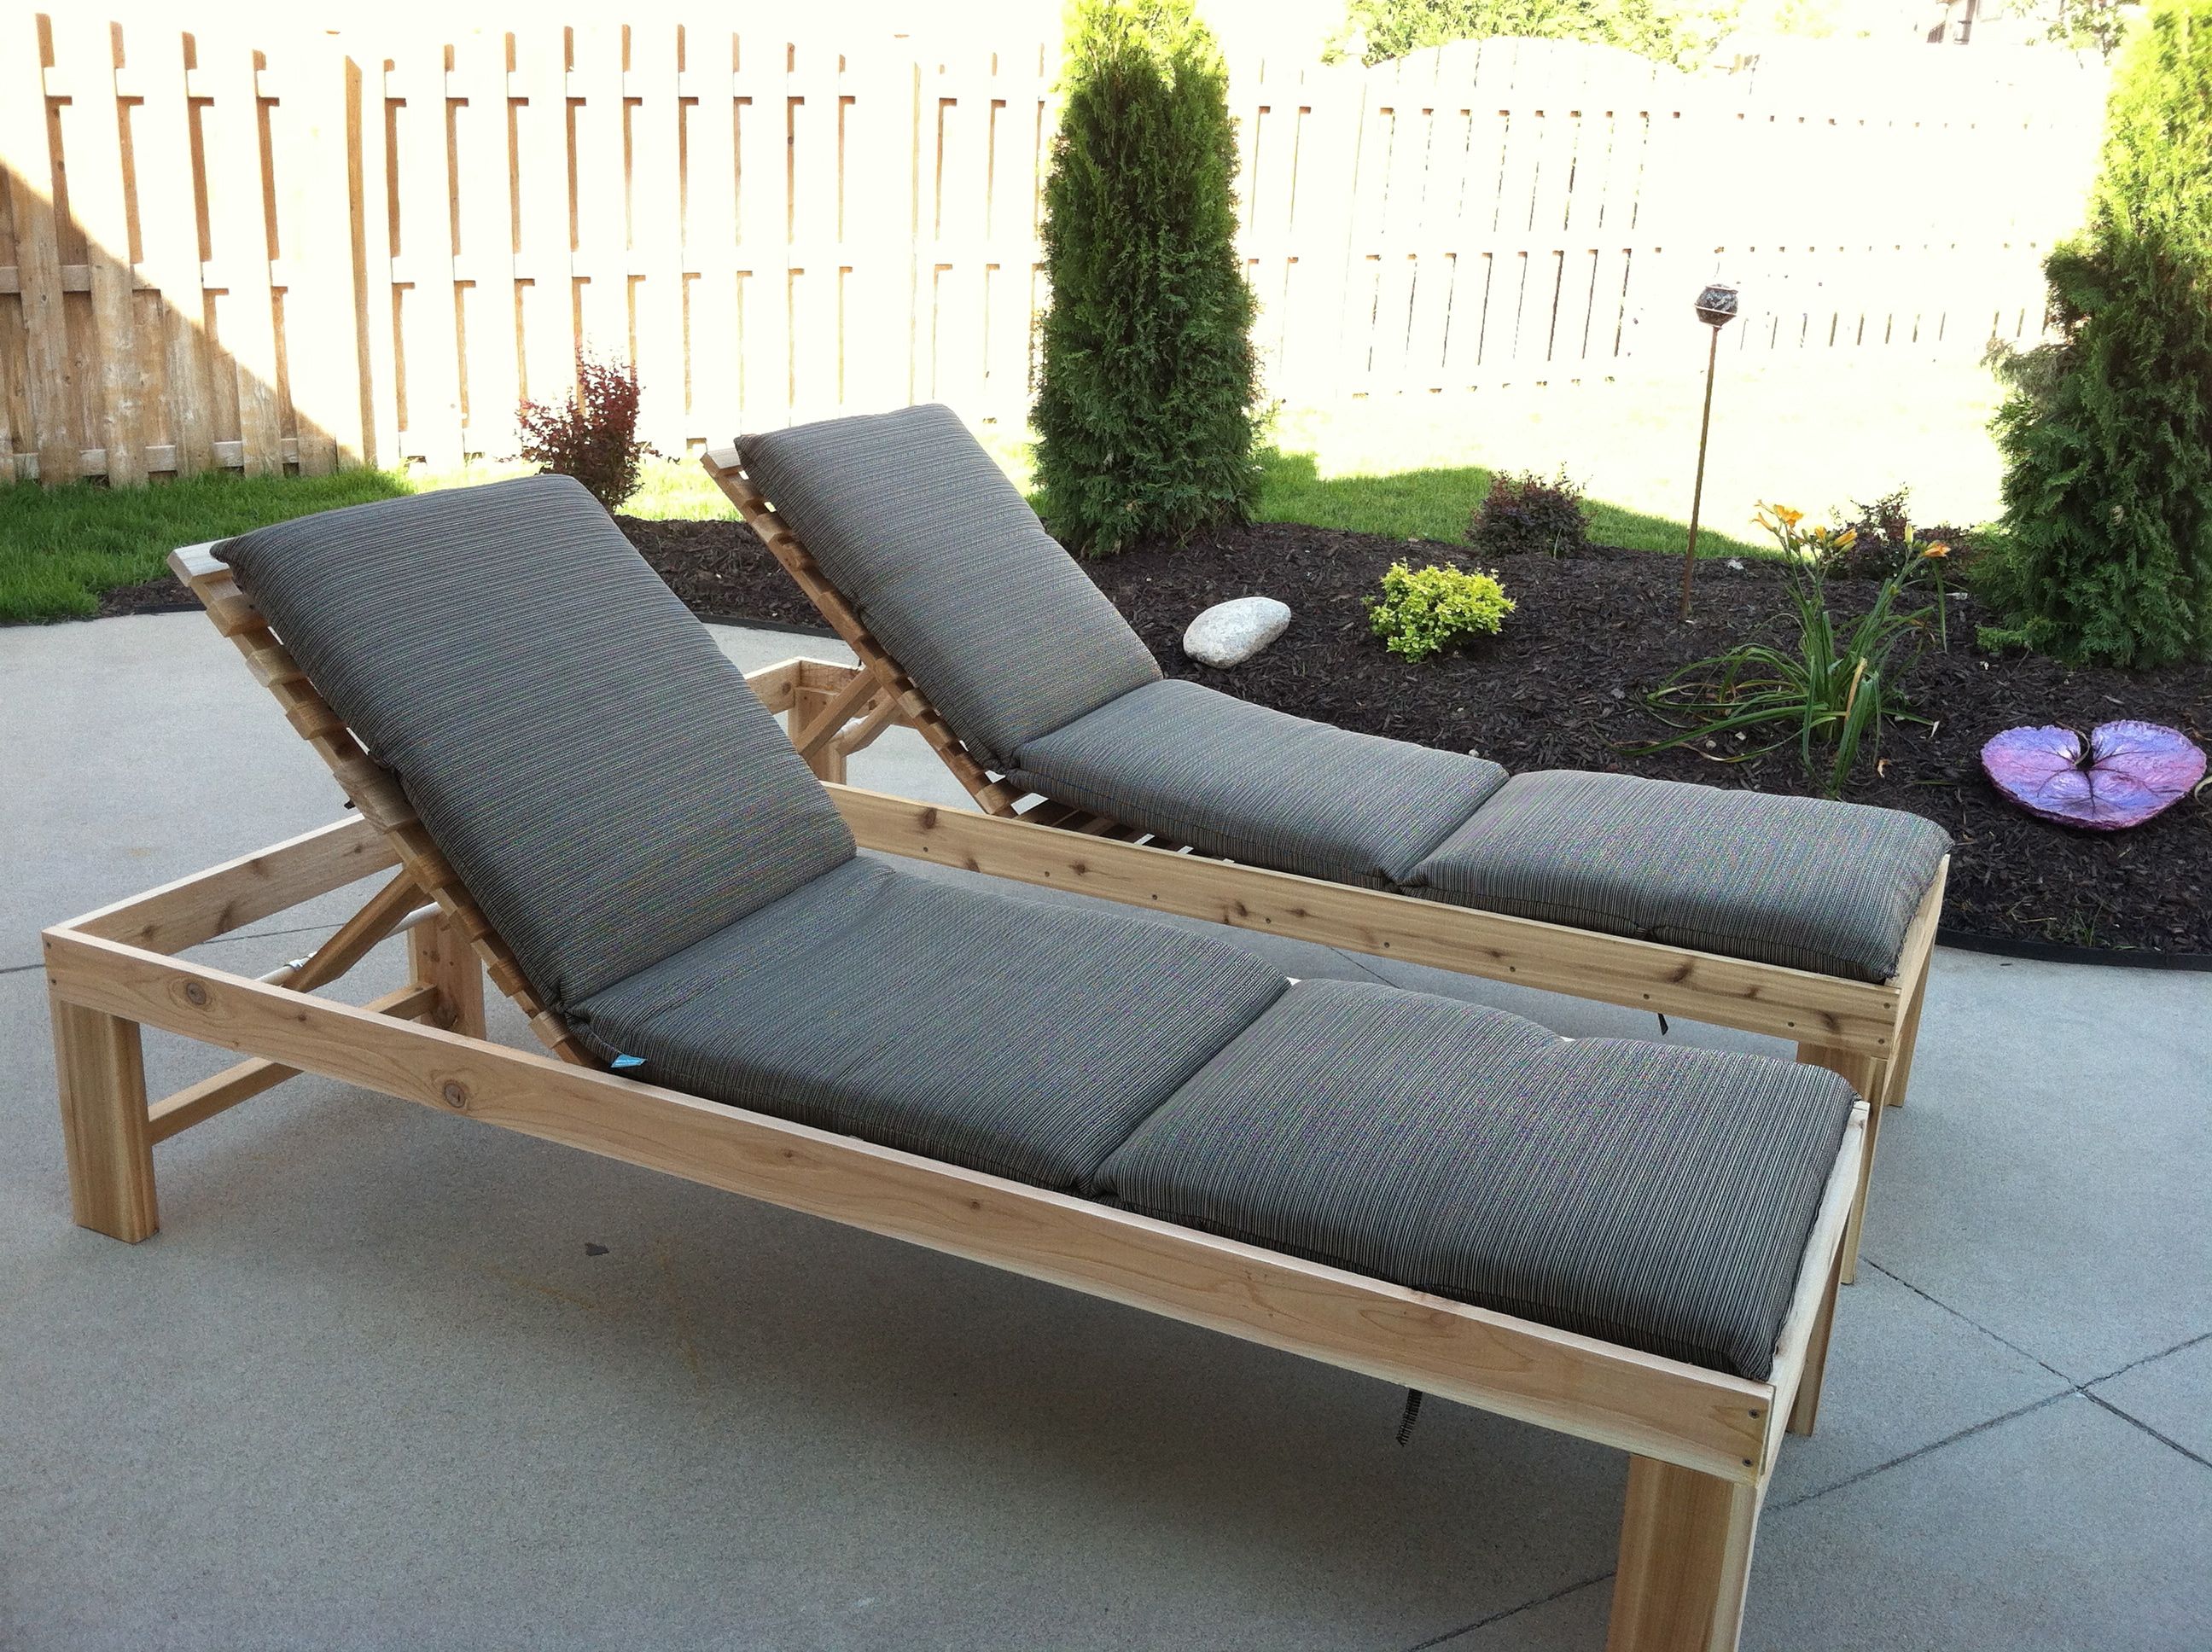 double chaise lounge outdoor furniture